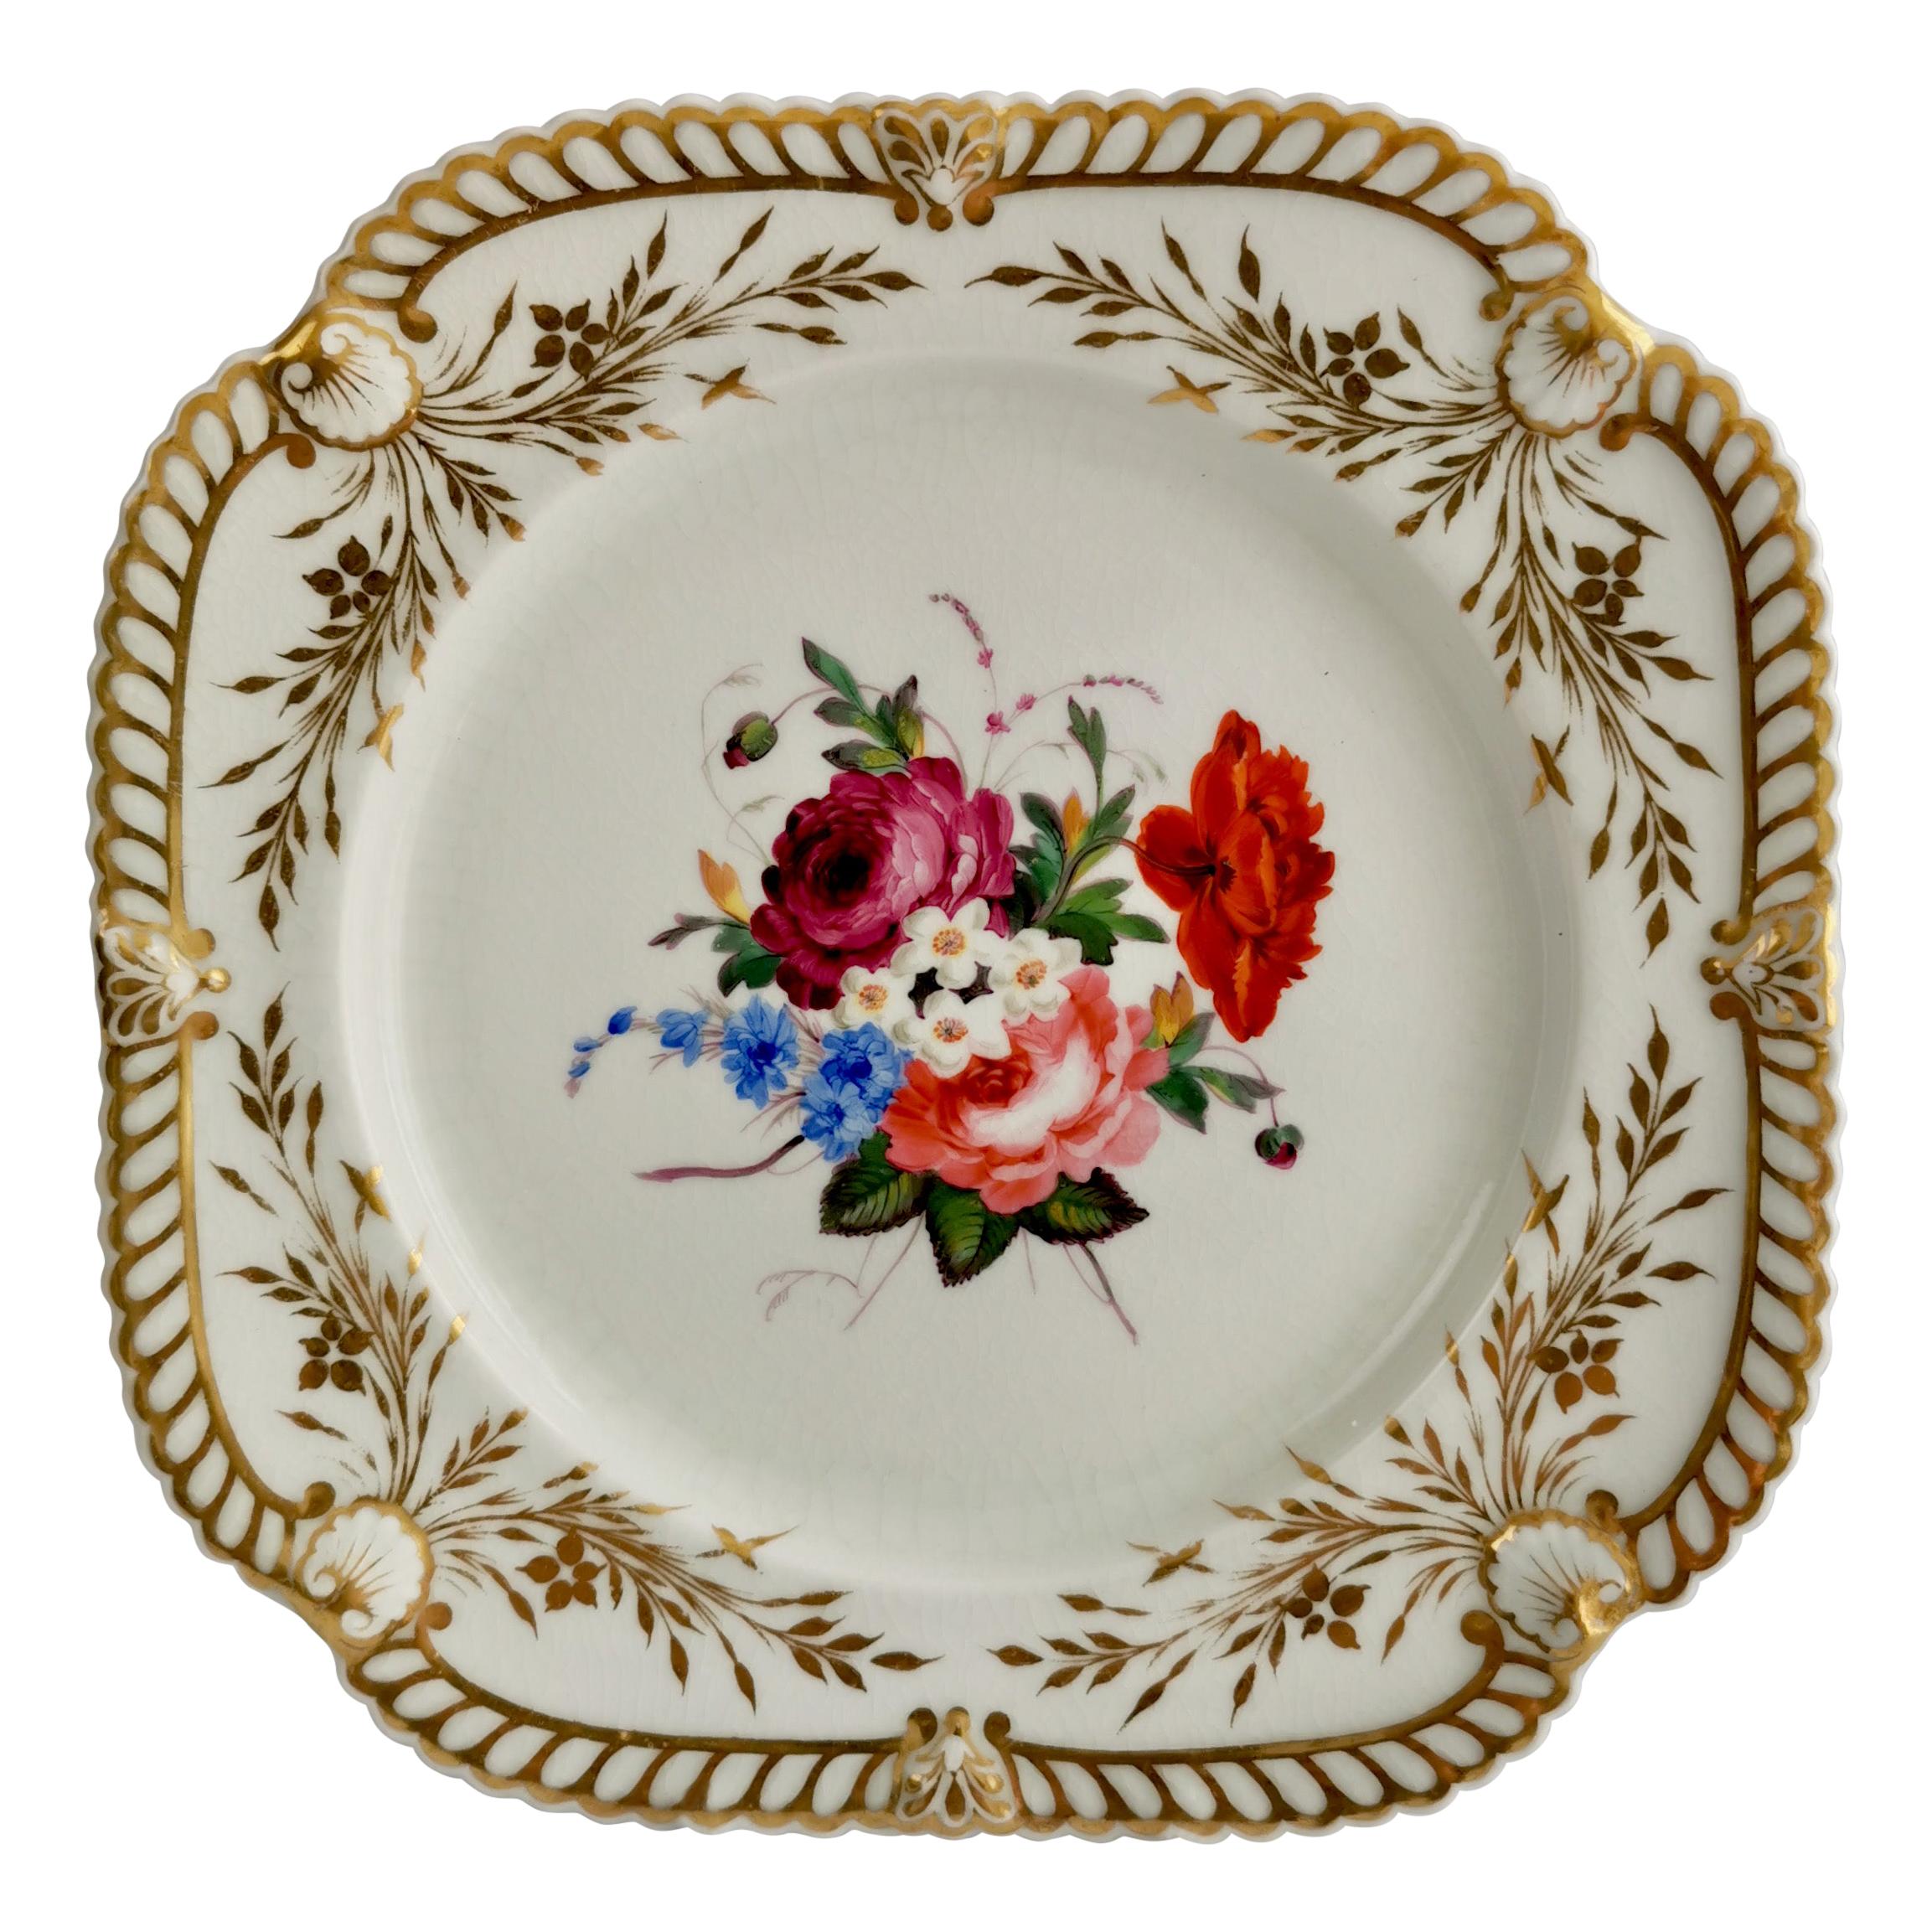 Chamberlains Worcester Porcelain Plate, White with Flowers, Regency ca 1822 '1'